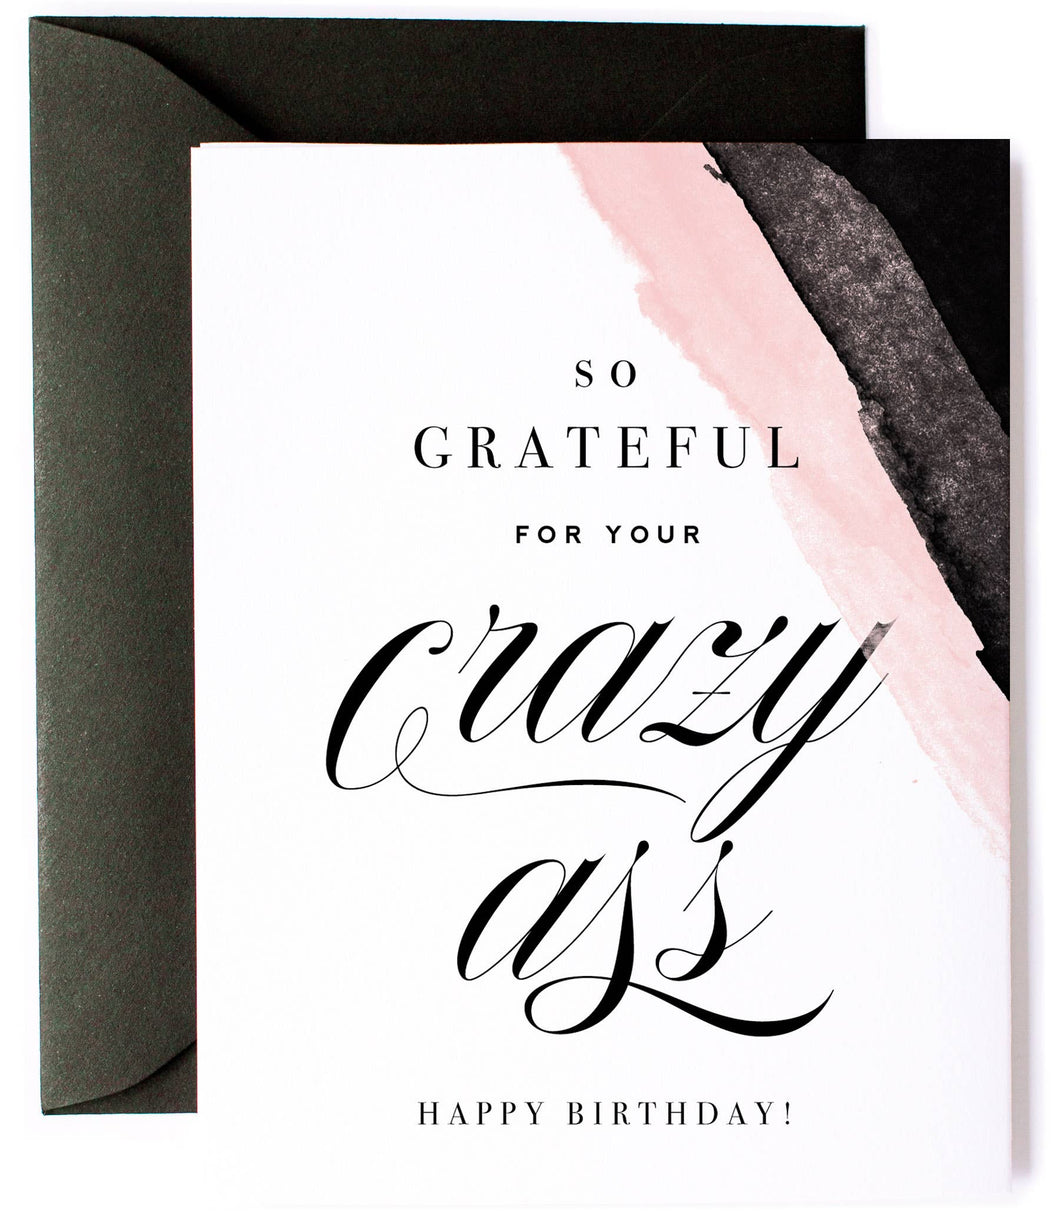 Grateful for Your Crazy Ass Funny Birthday Card